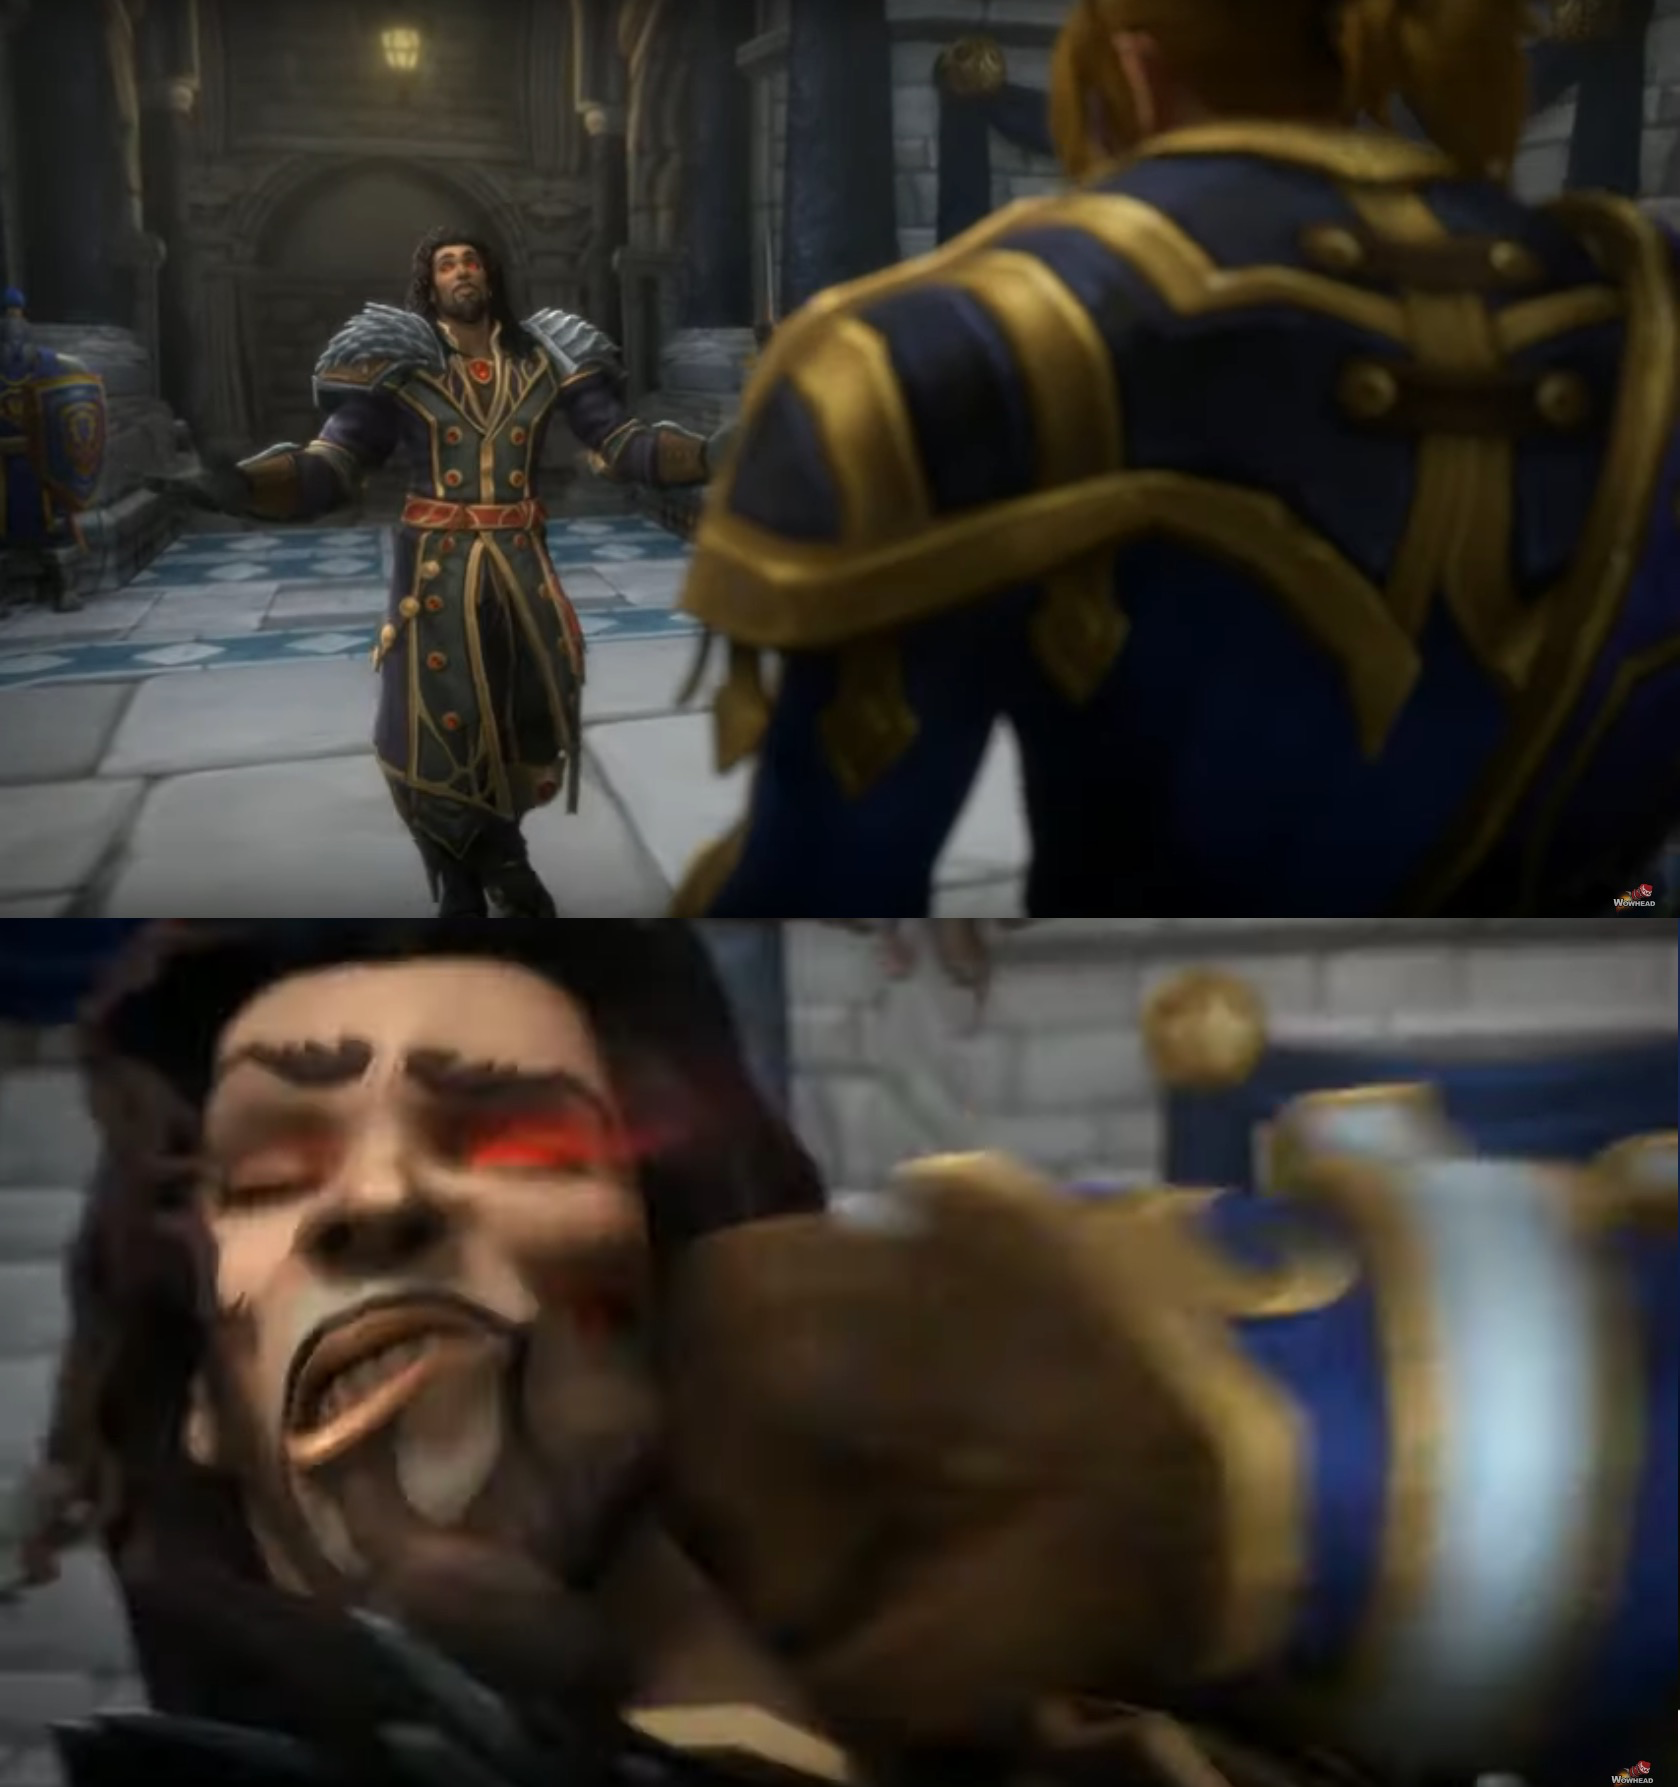 Wrathion getting punched Blank Meme Template